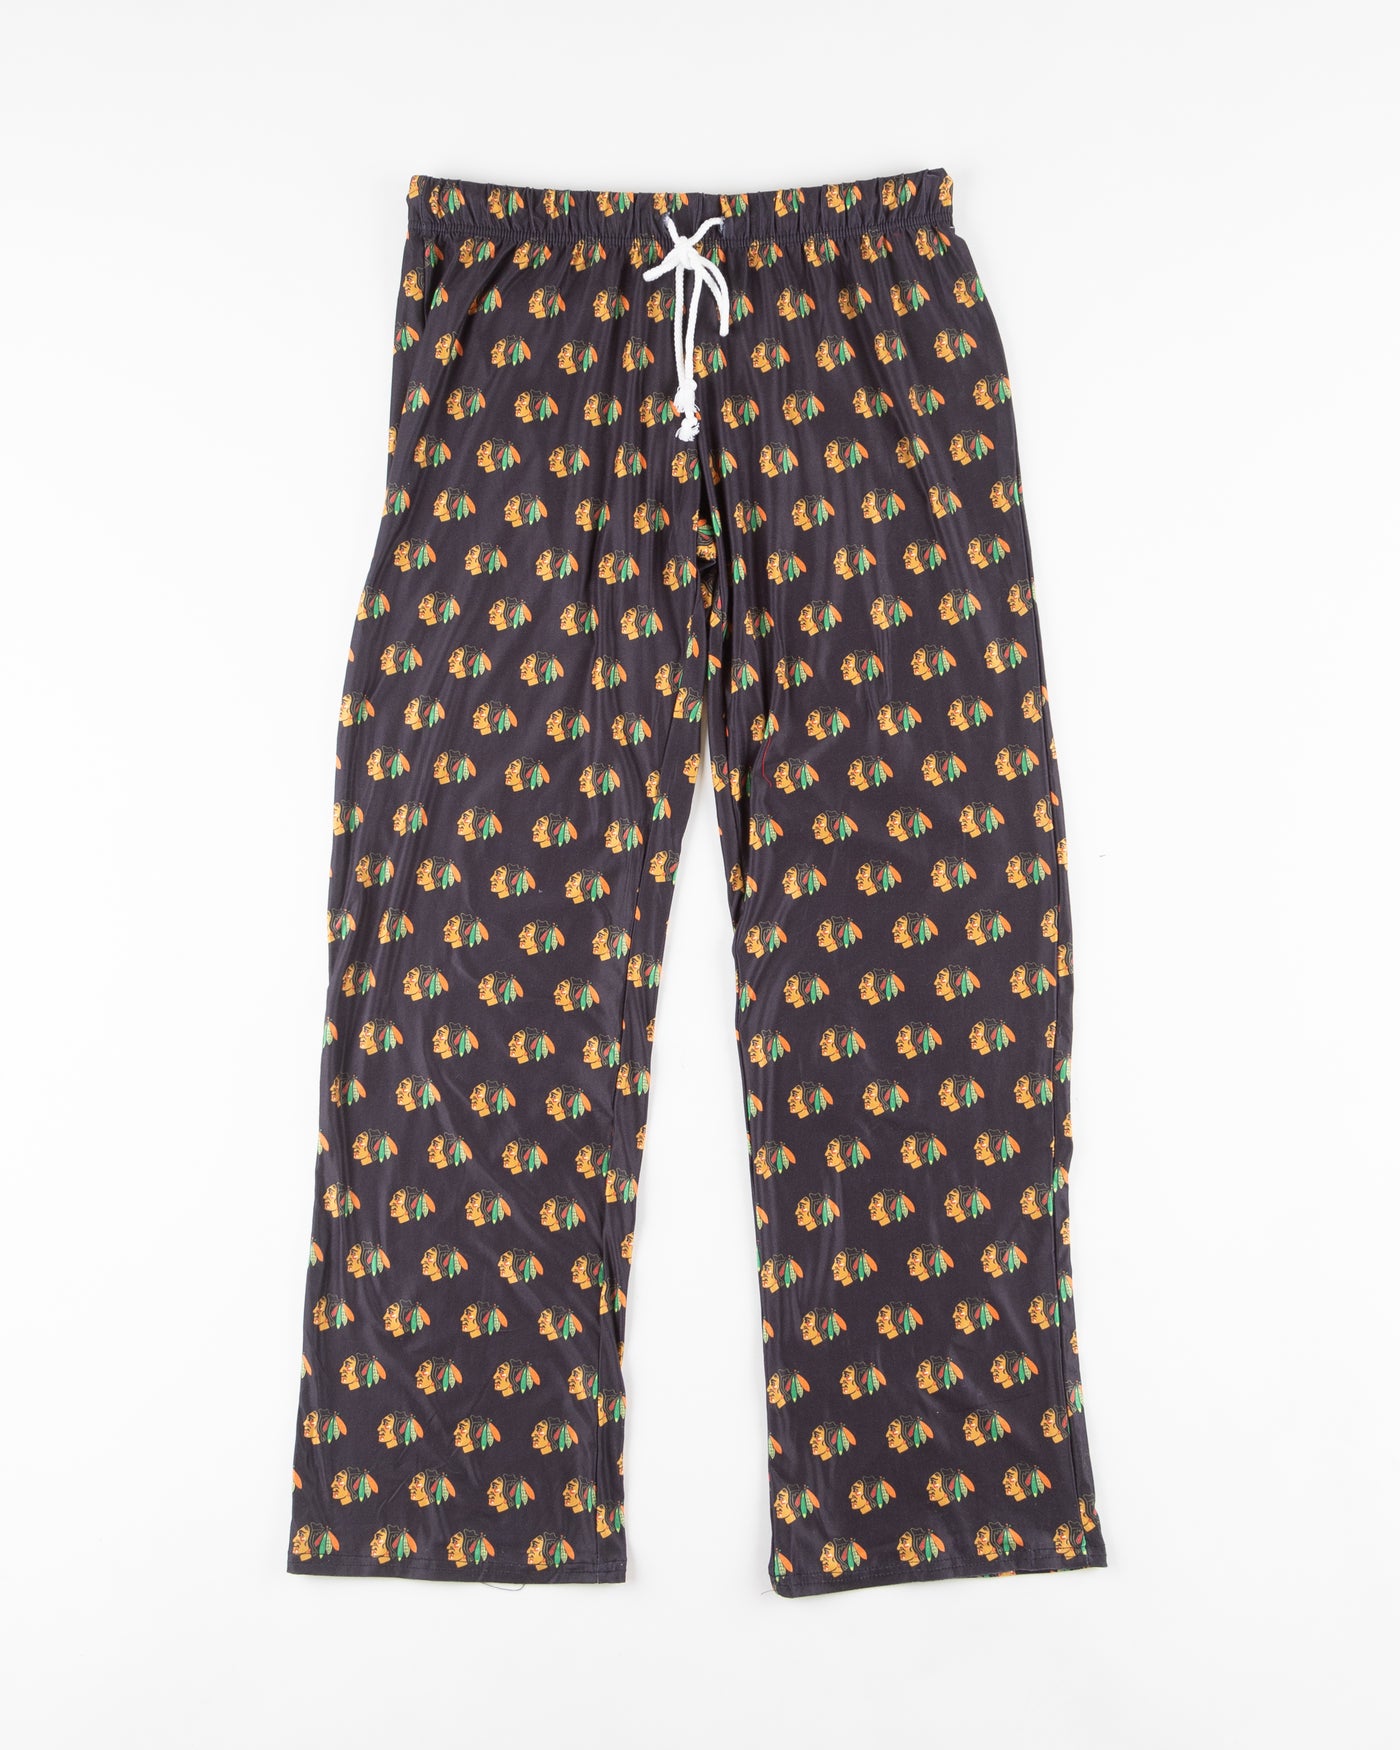 black ladies pajama pants with Chicago Blackhawks primary logo all over - front lay flat